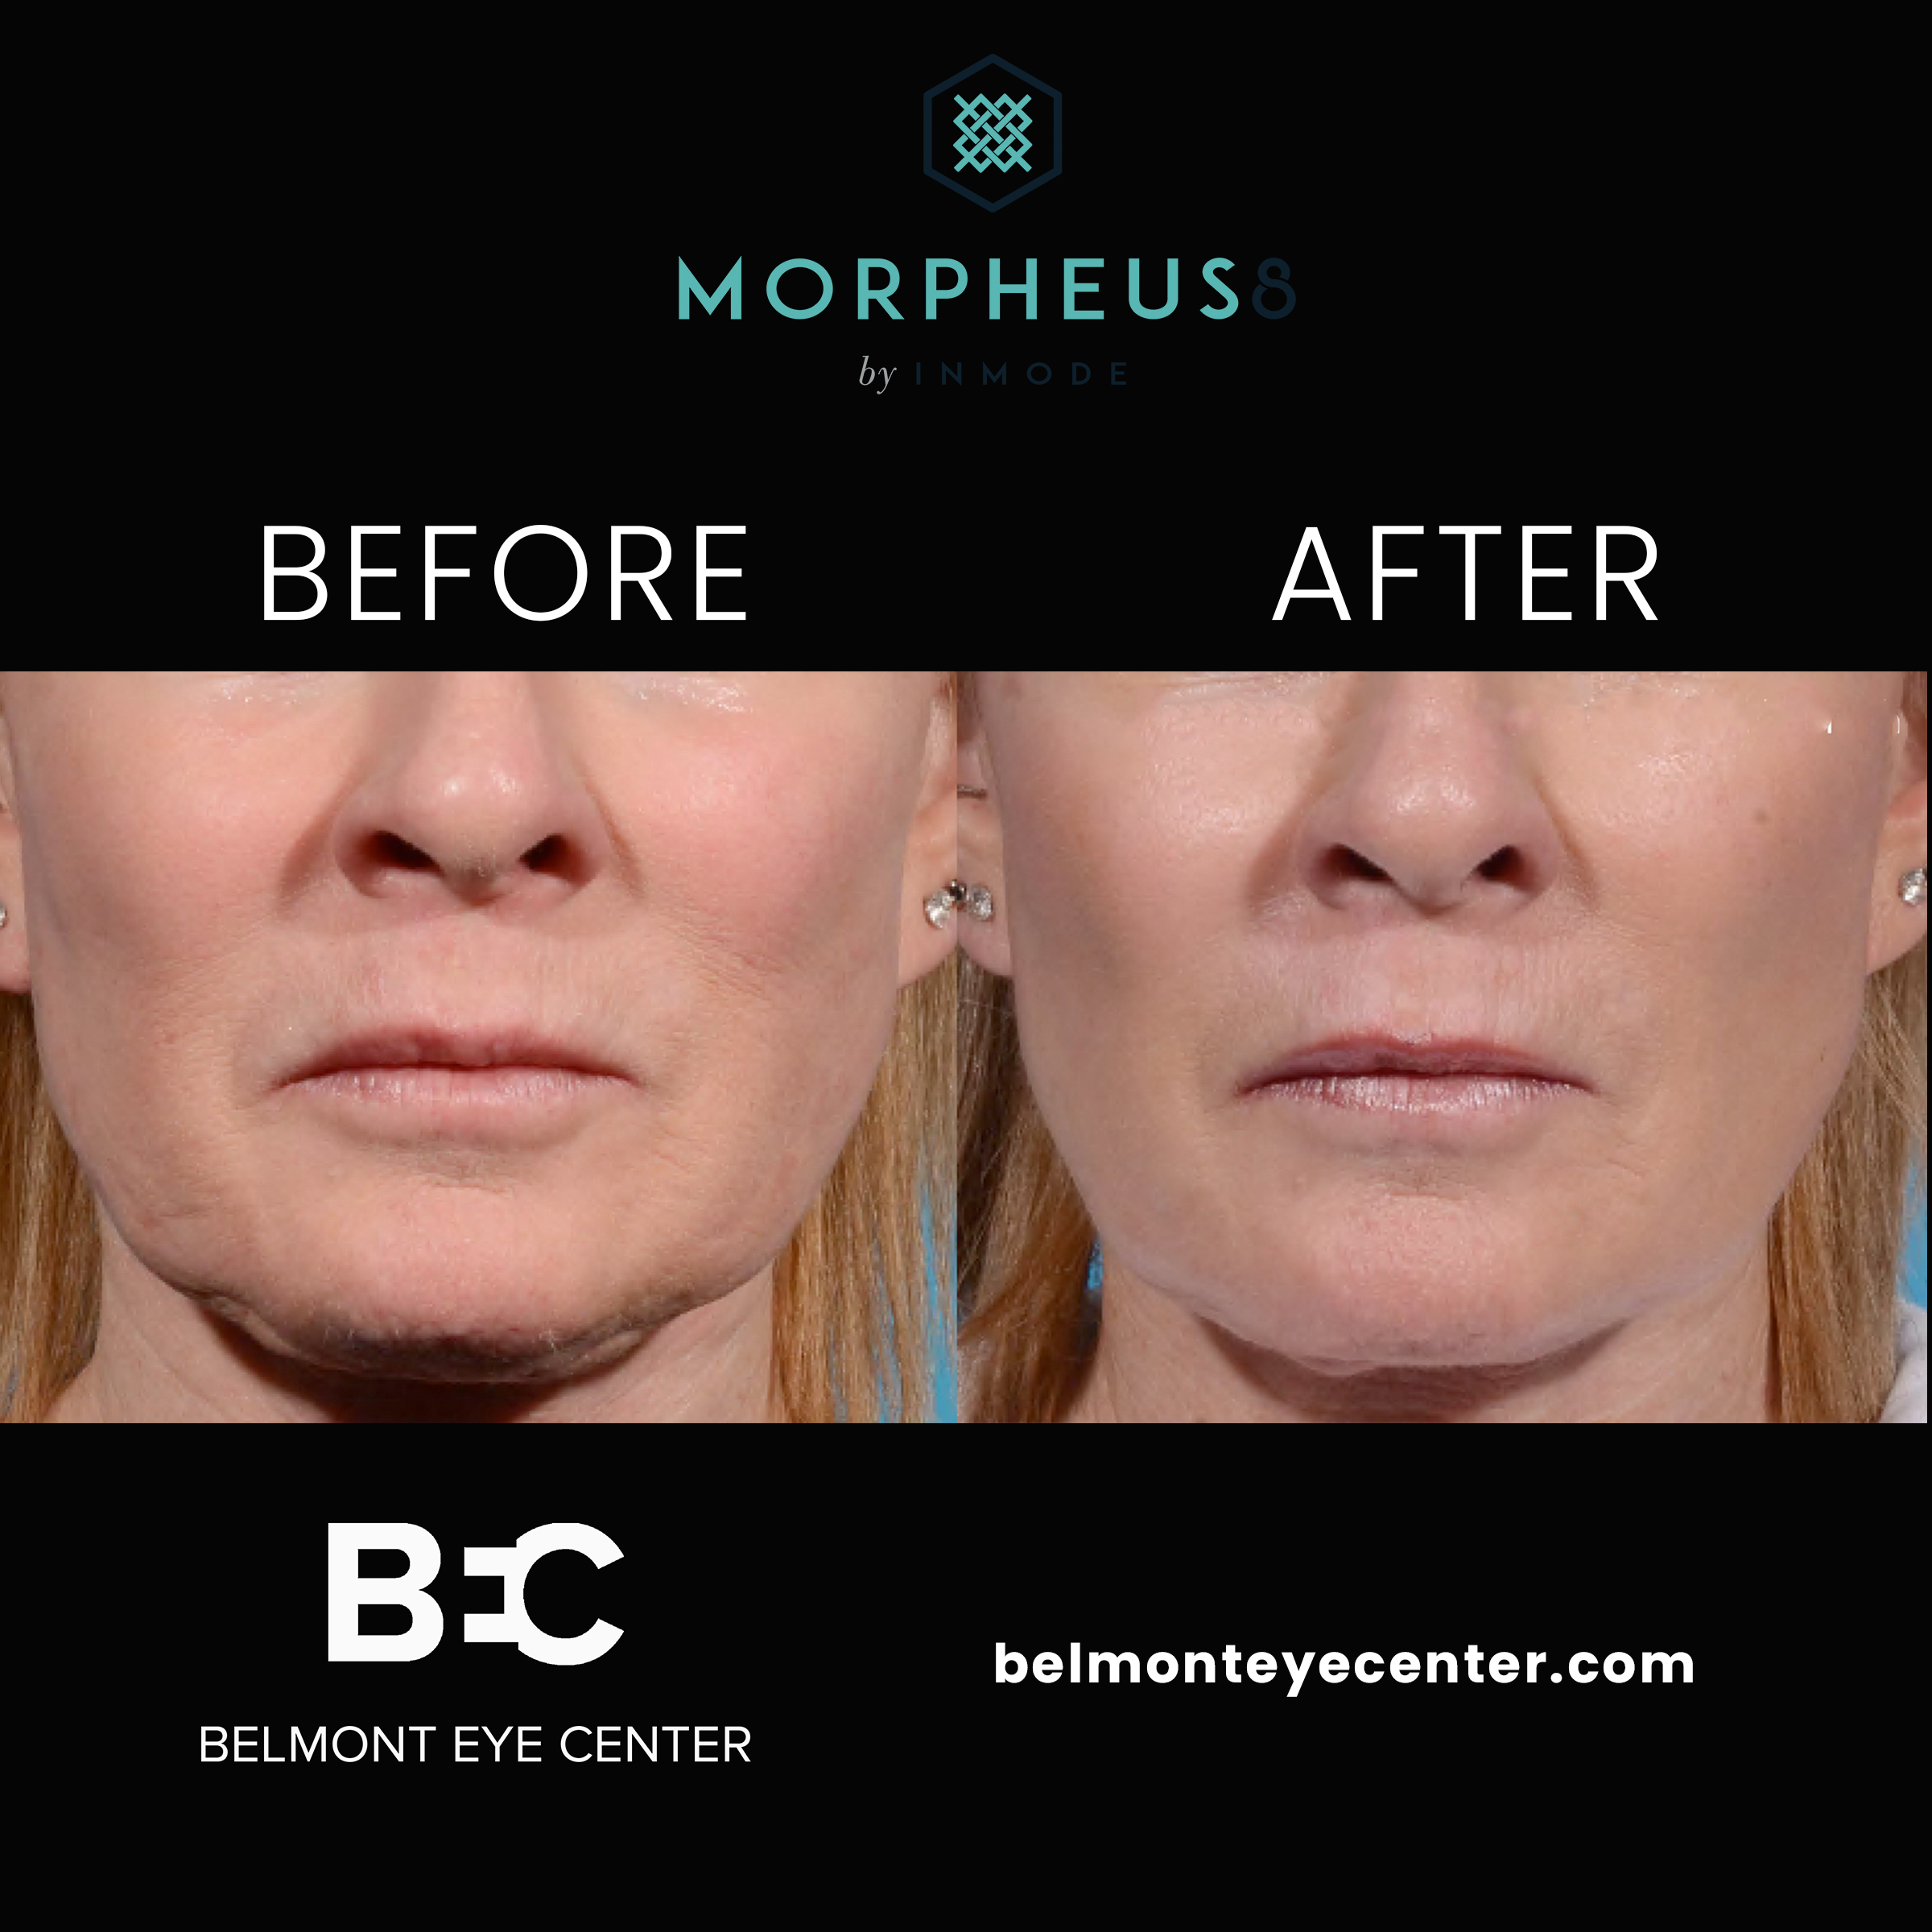 before after morpheus8 jowls